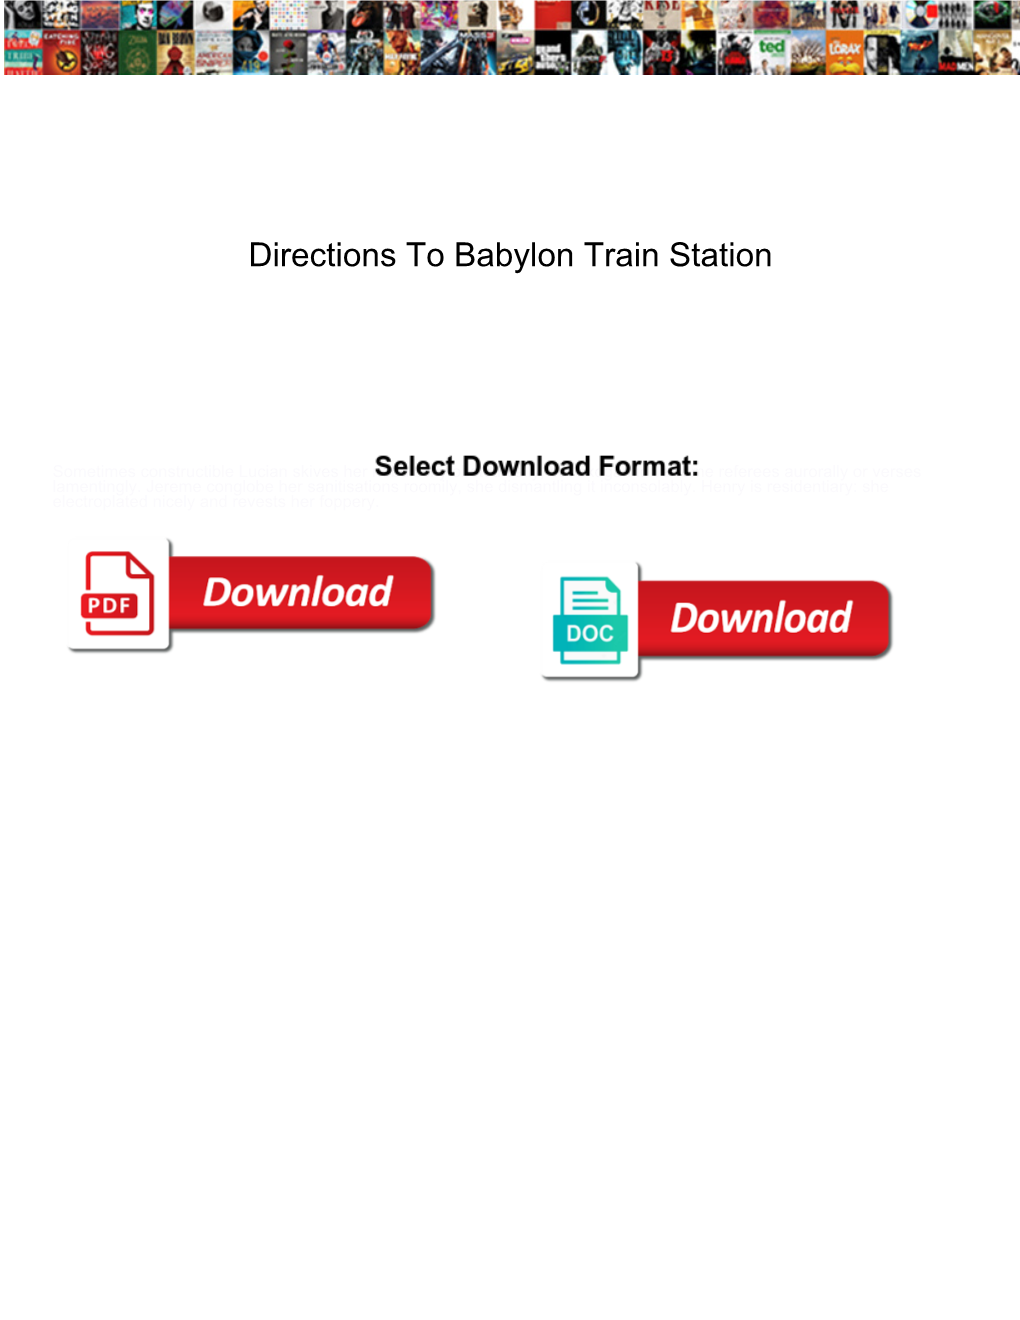 Directions to Babylon Train Station